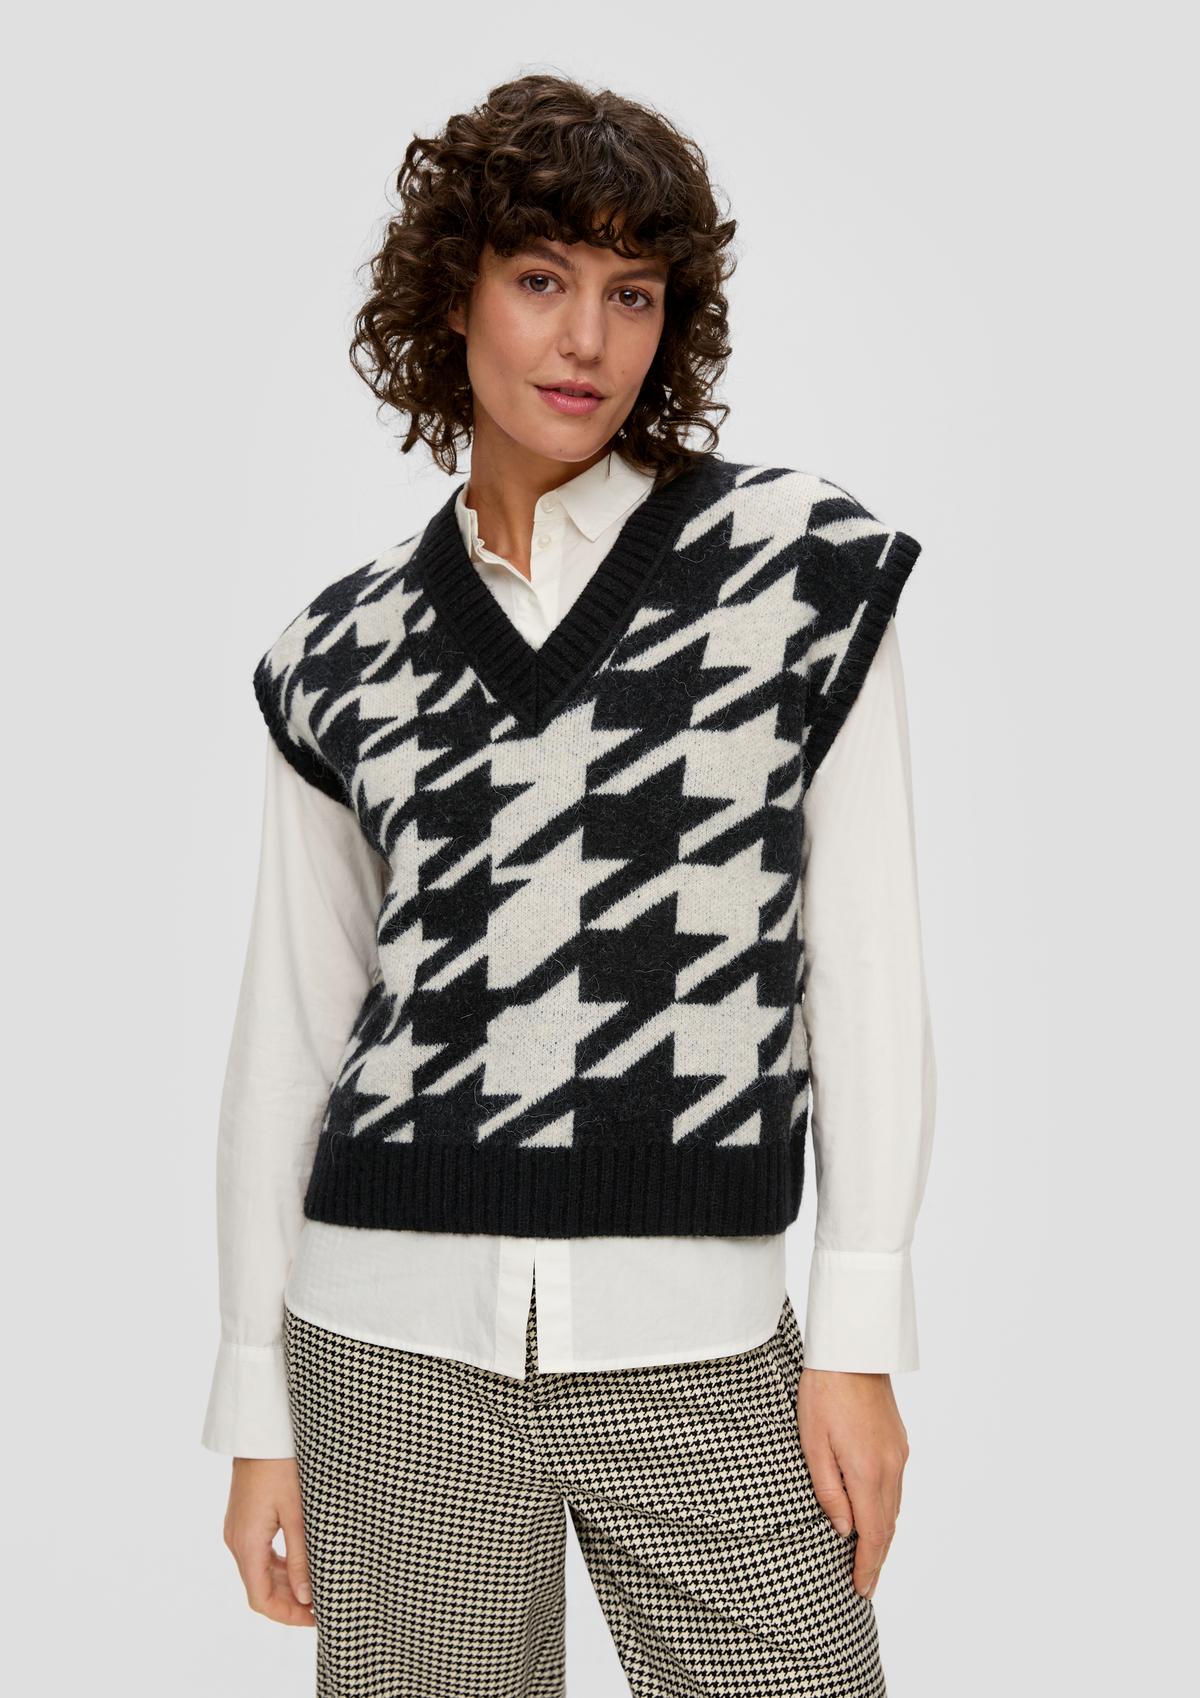 Sleeveless knitted jumper in a wool blend